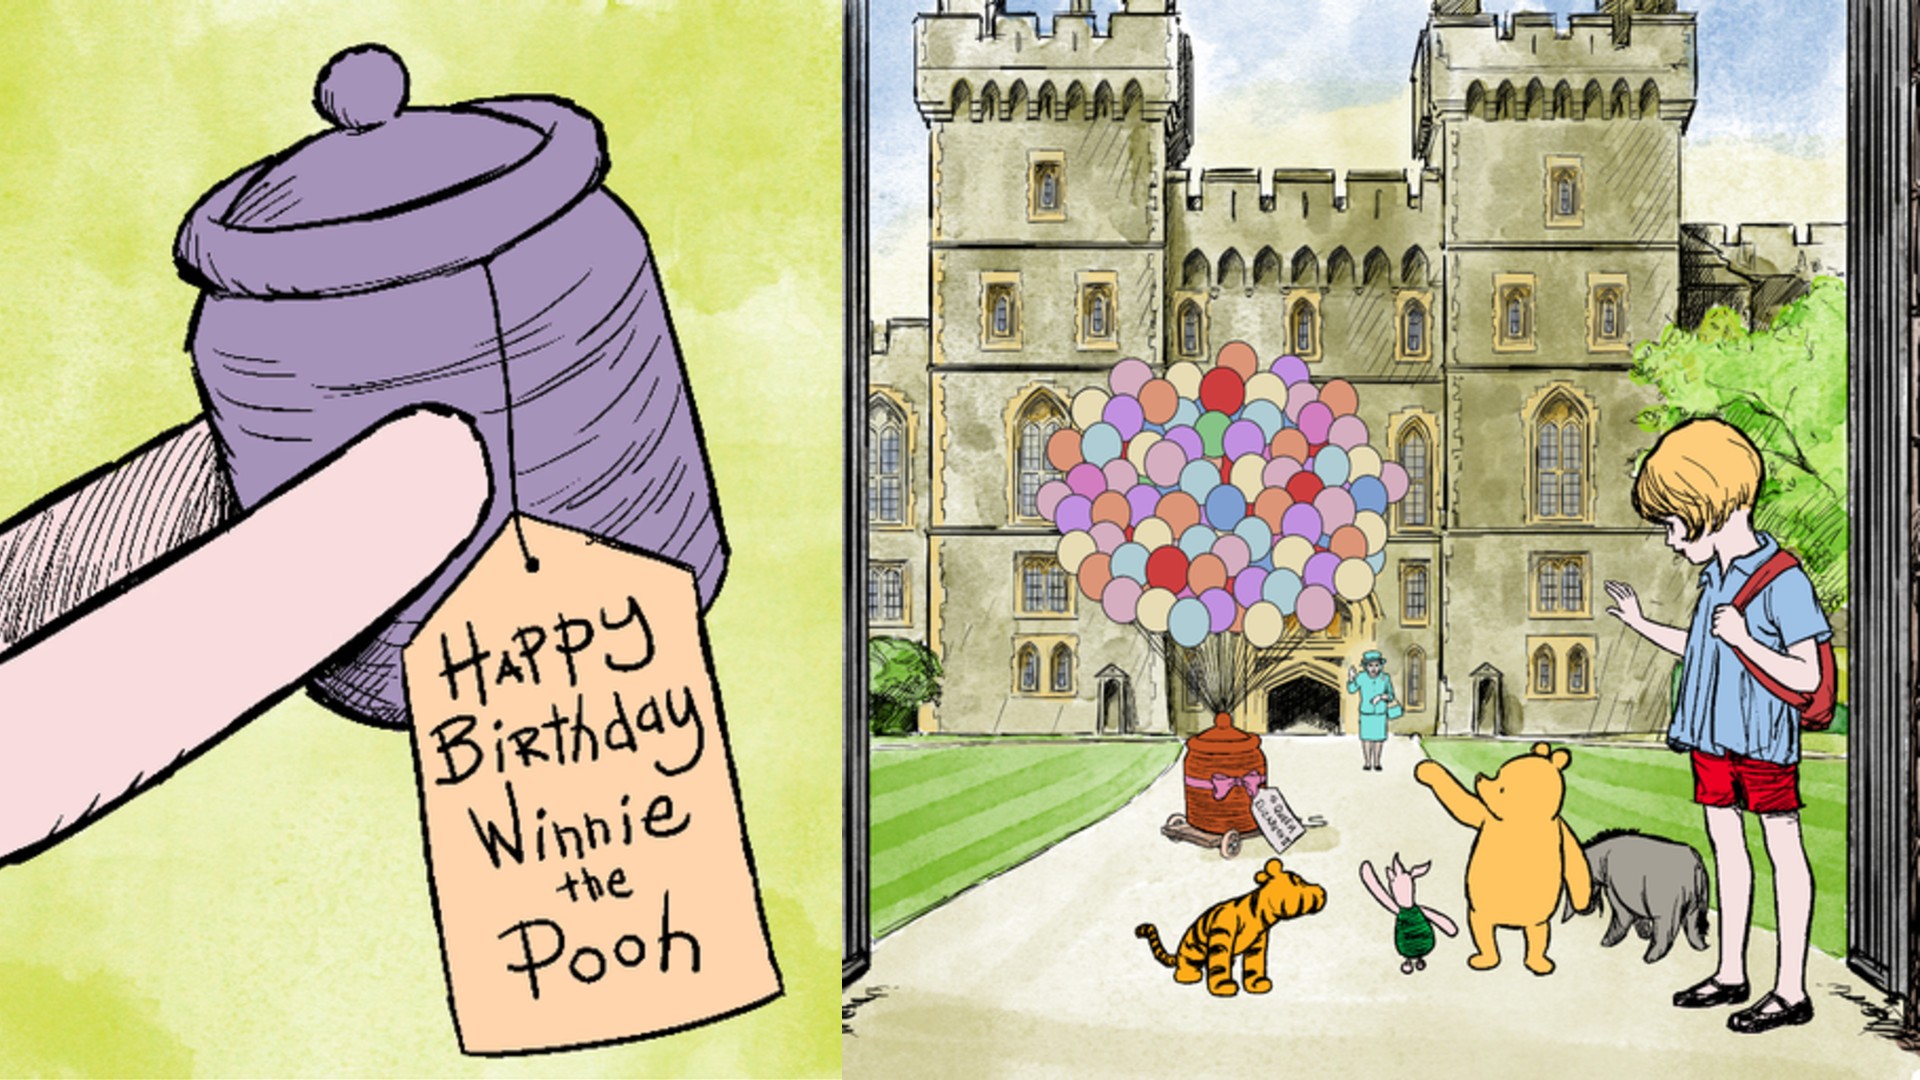 Disney releases animation to celebrate Winnie the Pooh's 95th birthday -  with a tribute to the Queen | ITV News